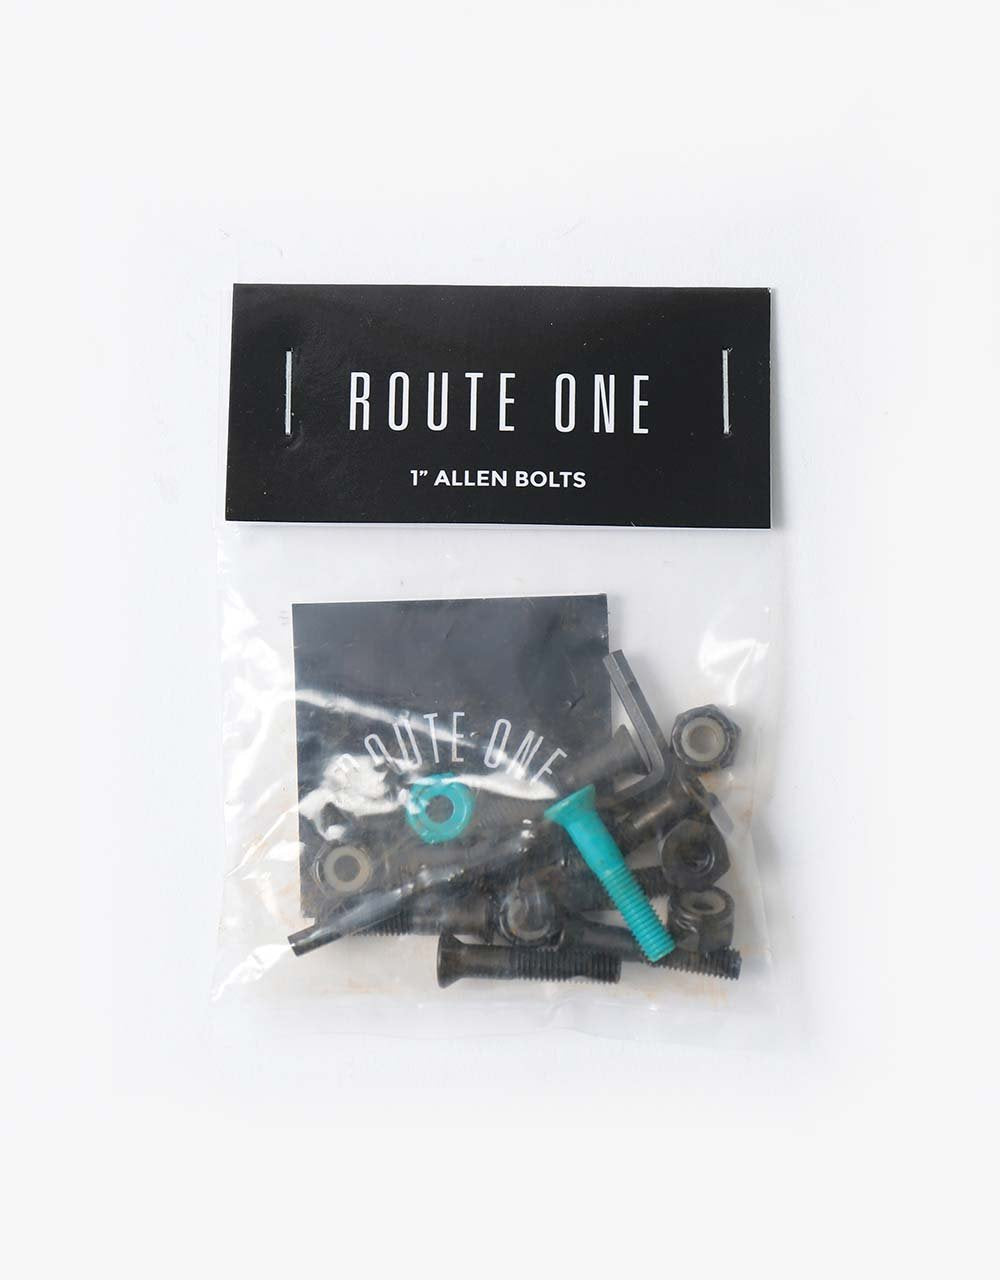 Route One 7/8" Allen Bolts